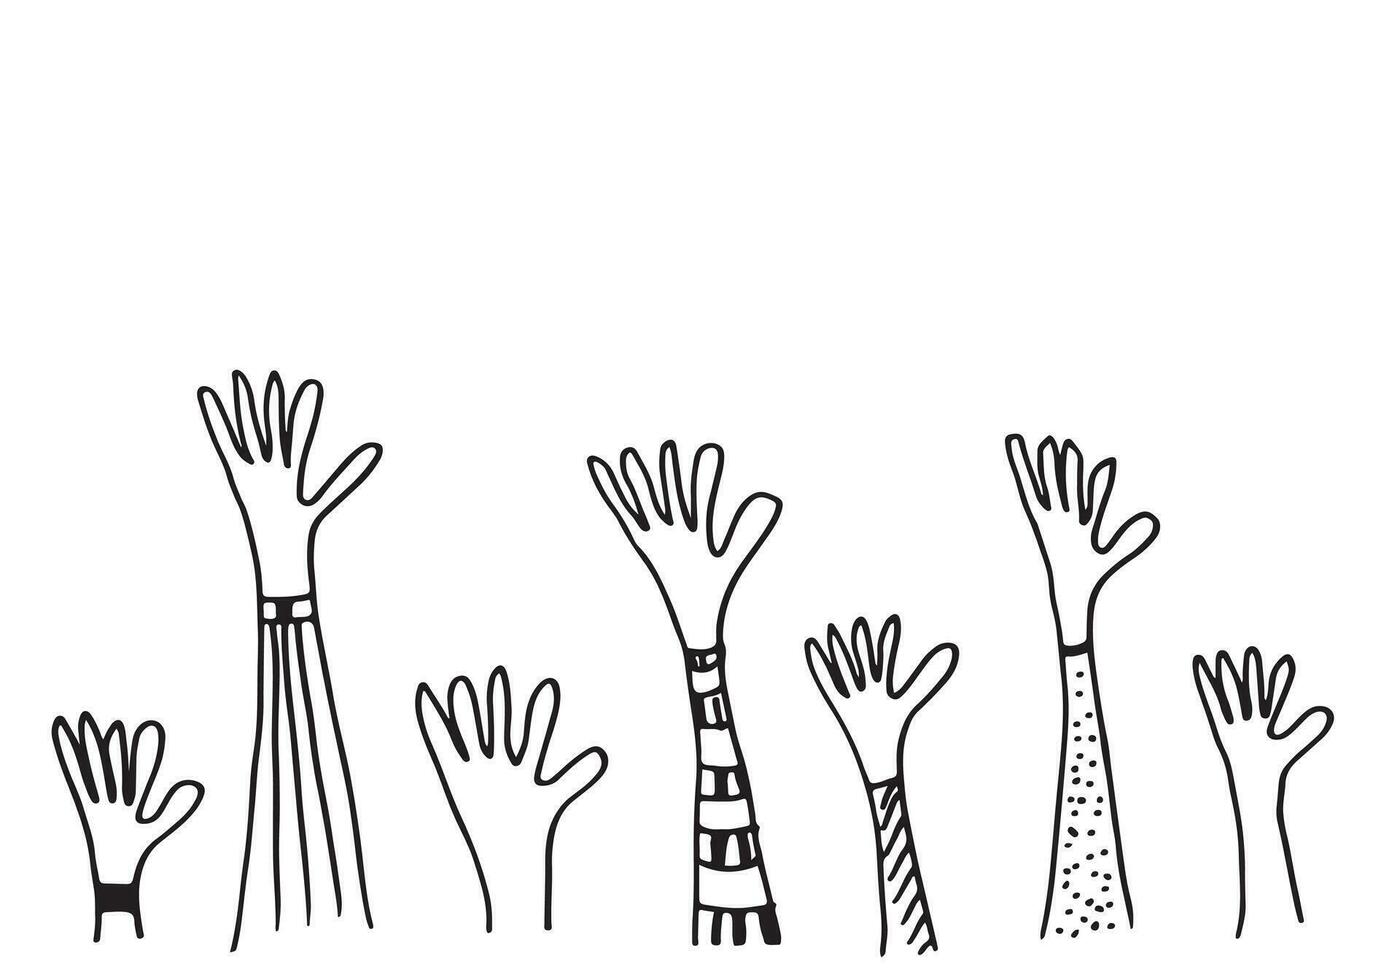 Applause hand draw on white background.vector illustration. vector